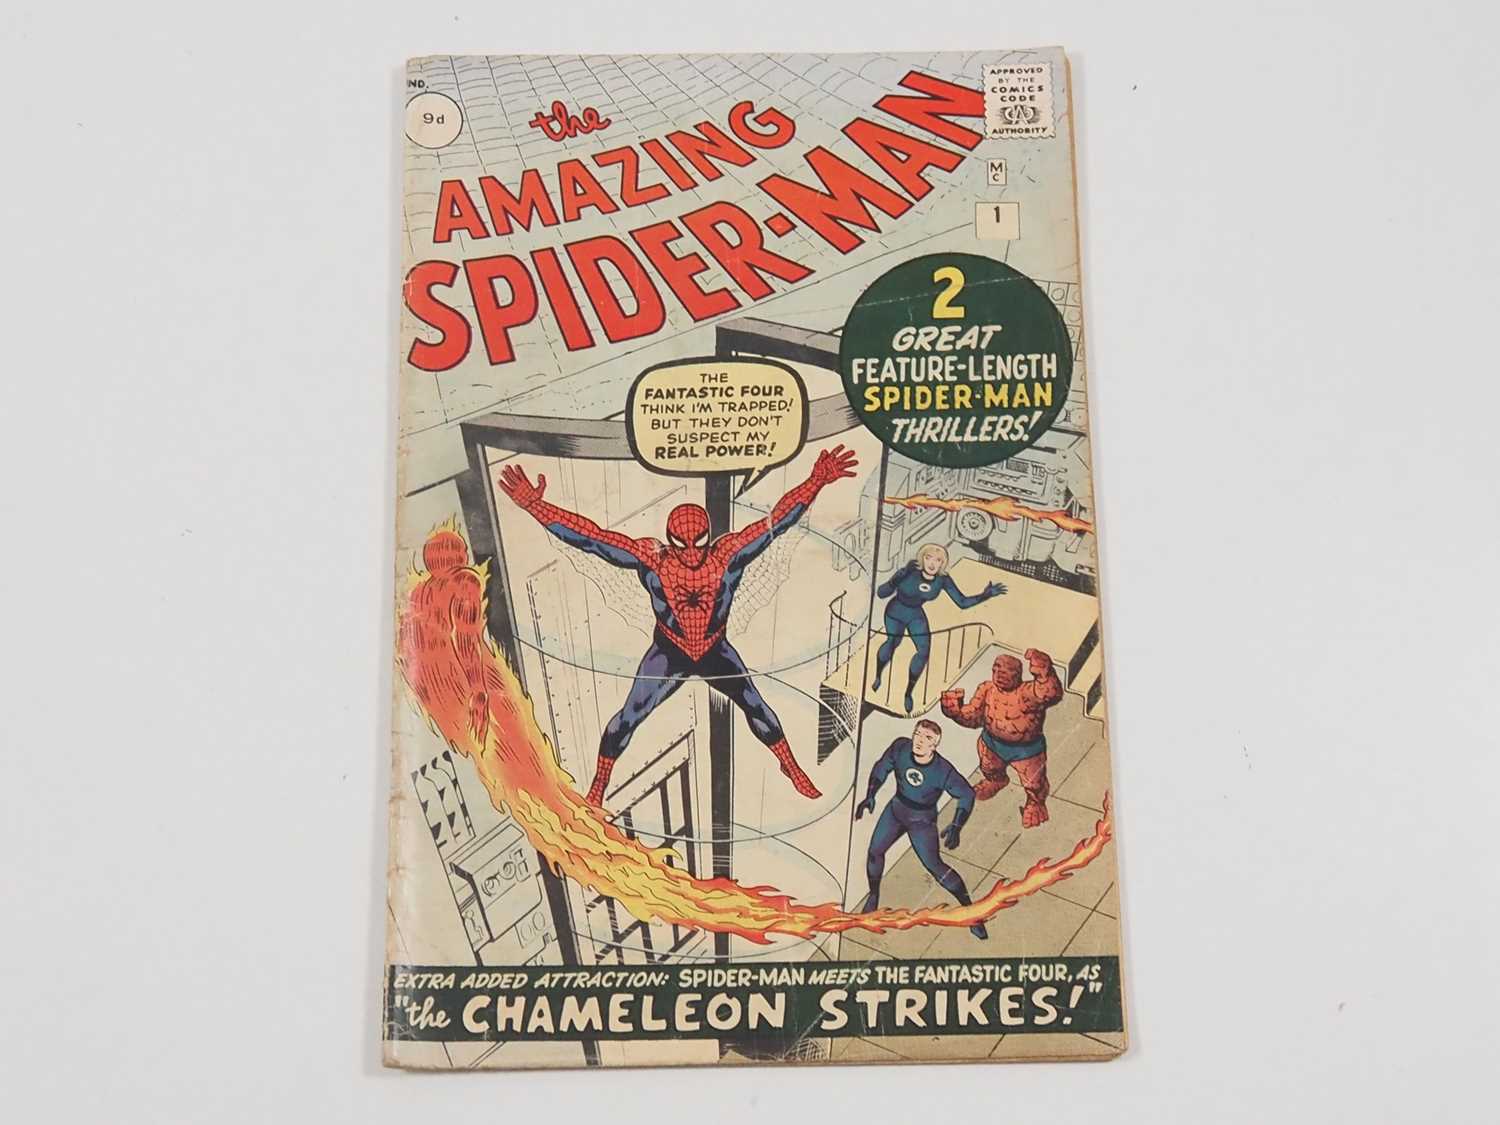 AMAZING SPIDER-MAN #1 - (1963 - MARVEL - UK Price Variant) - KEY Comic Book with first appearance of